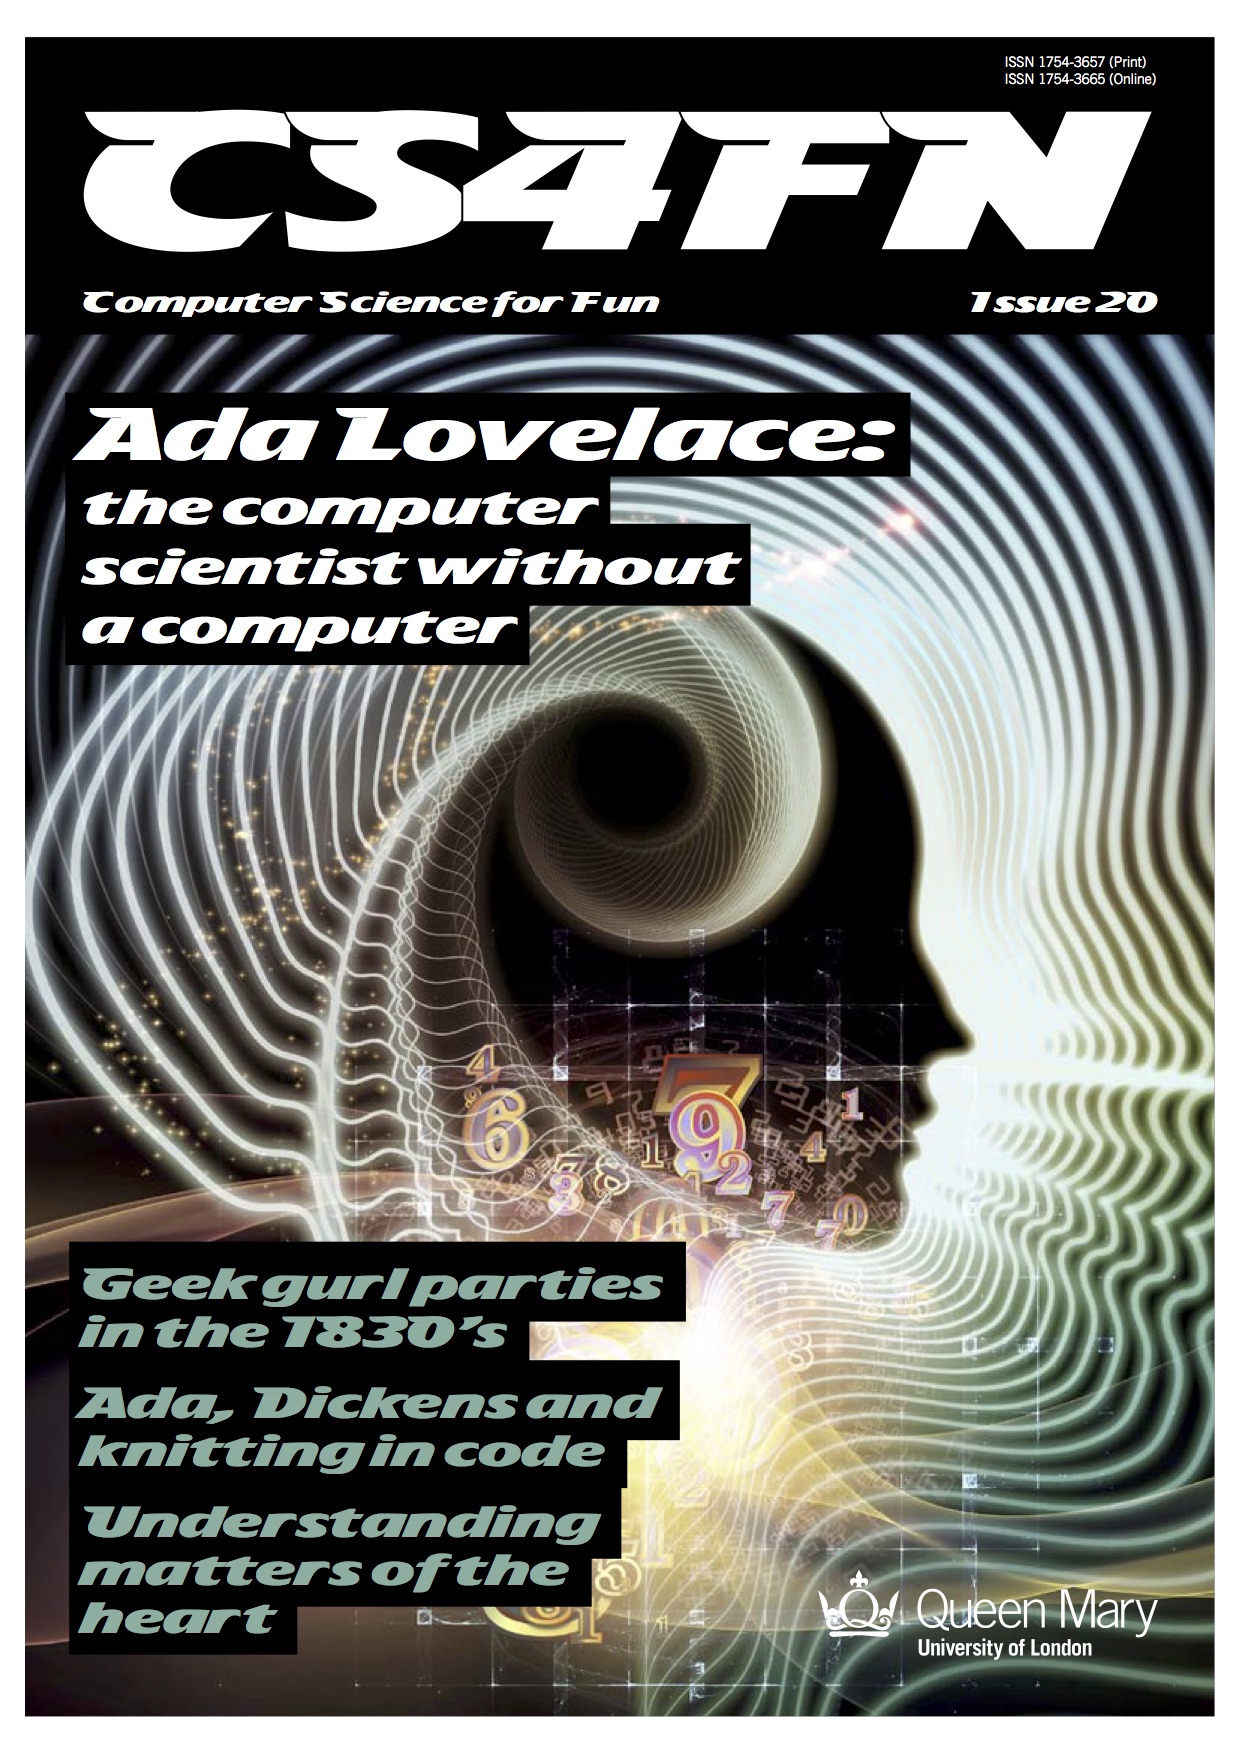 Front cover of issue 20 on Ada Lovelace: Silhouette of female head with pattern swirling from it